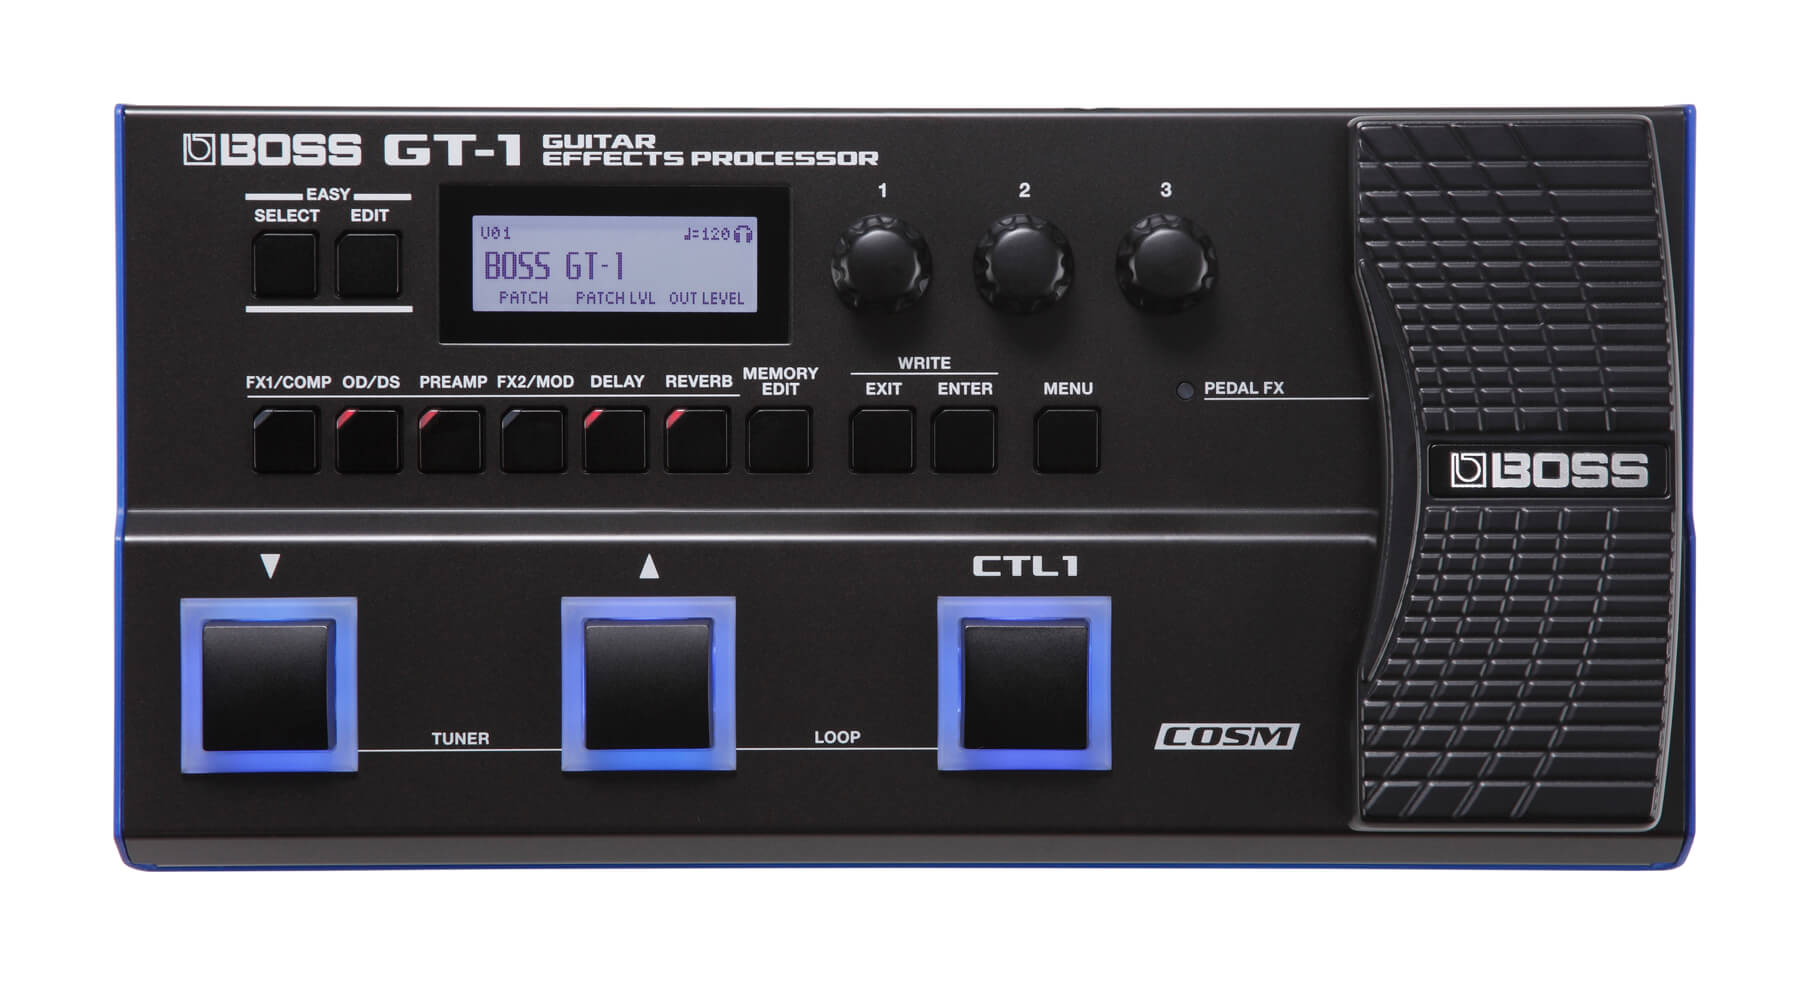 Boss GT-1 guitar effects processor available